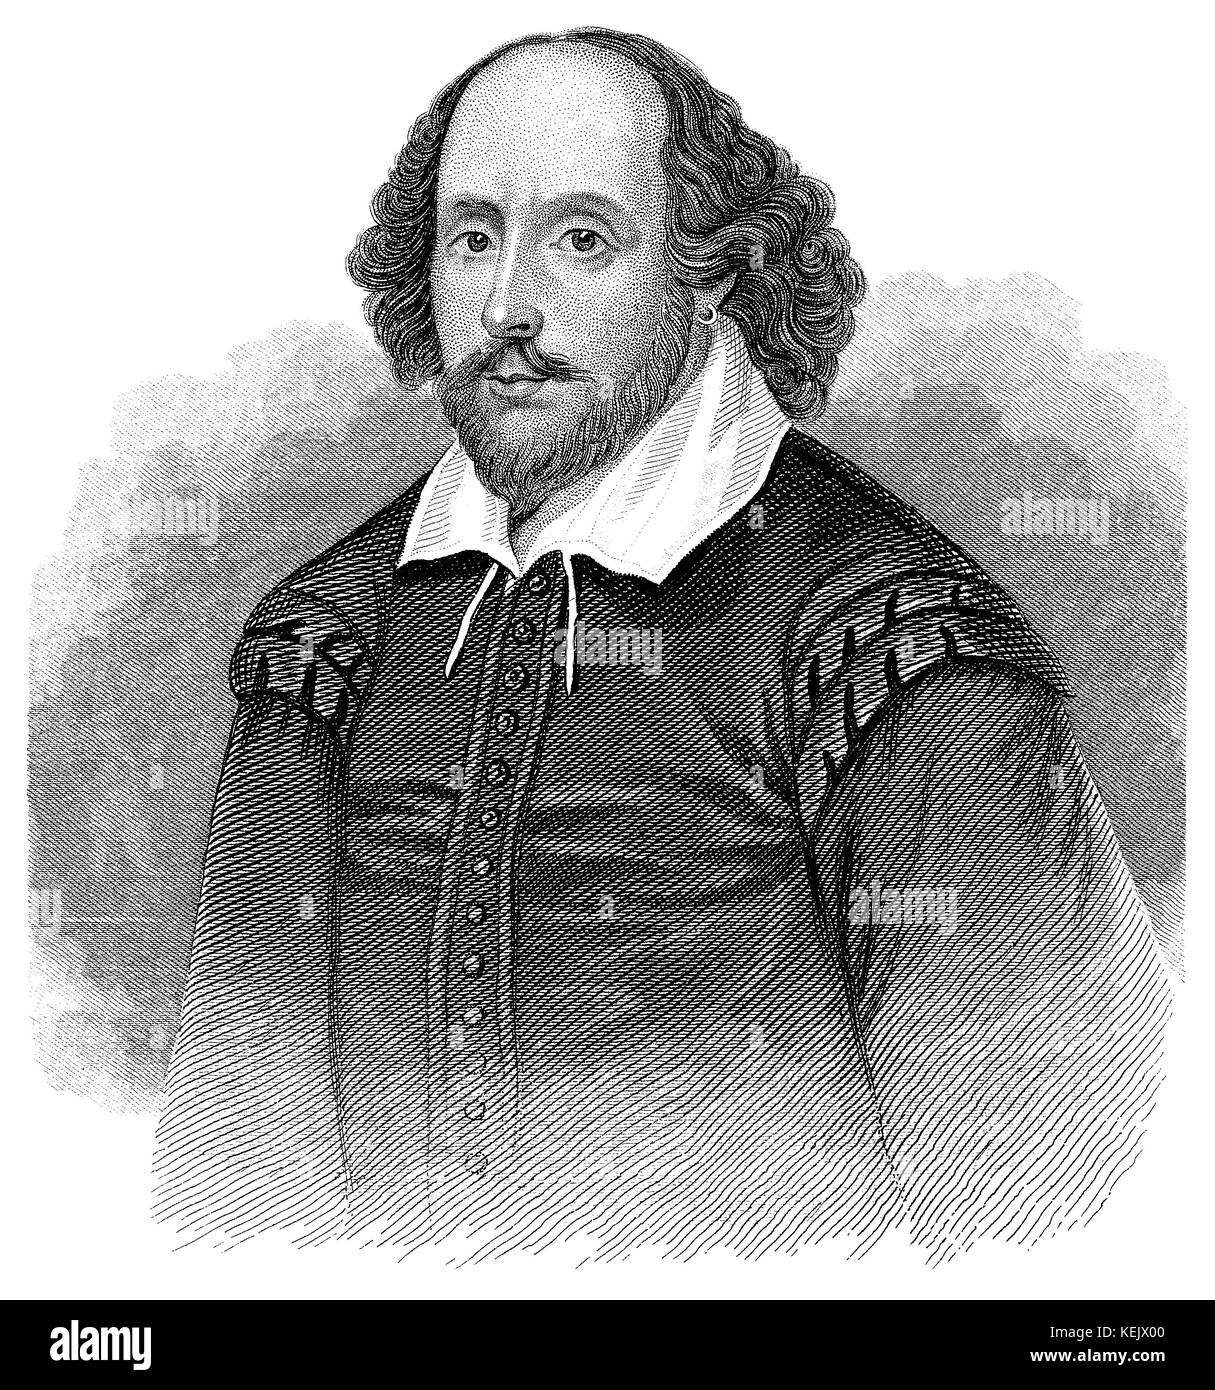 1853 engraving of playwright and poet William Shakespeare. Stock Photo